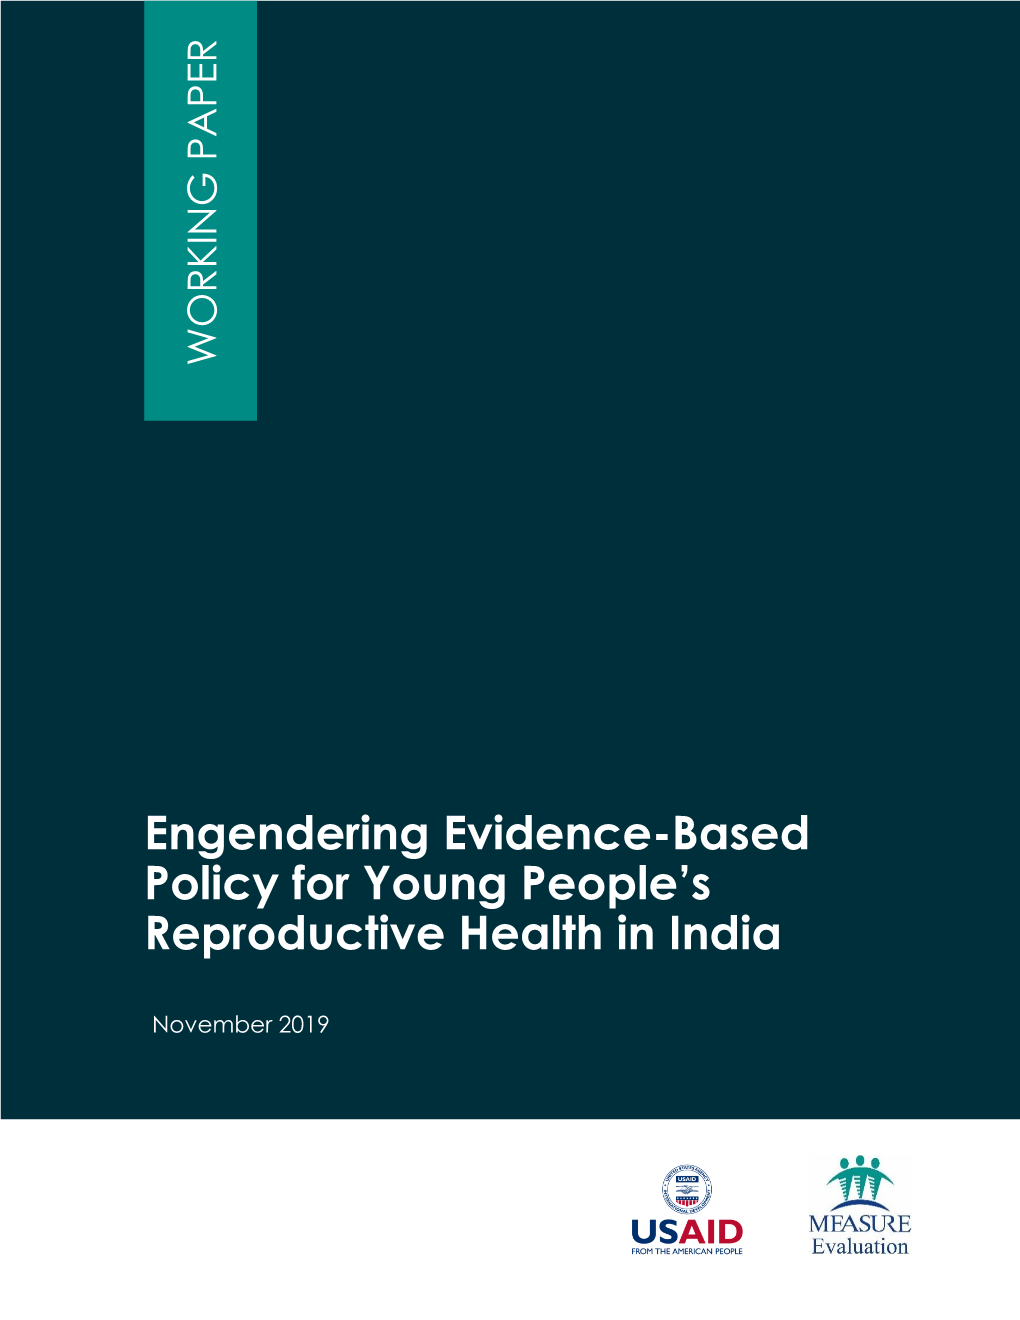 Engendering Evidence-Based Policy for Young People's Reproductive